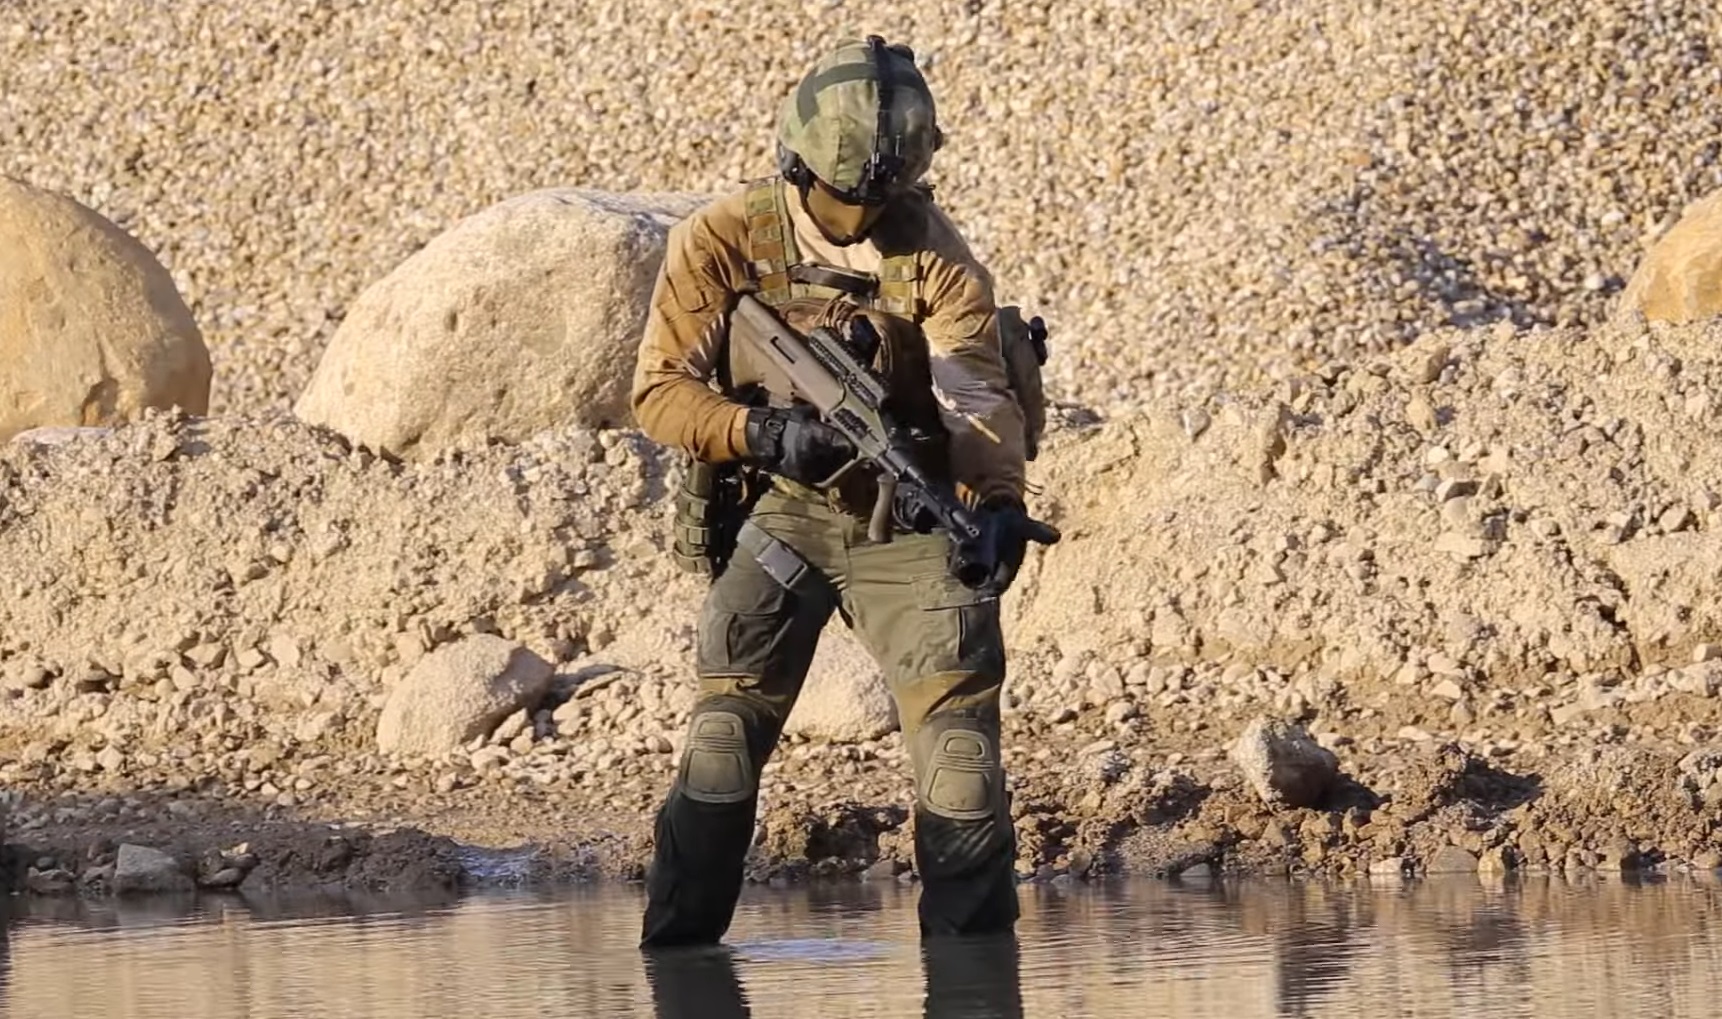 A soldier standing on shallow waters is seen wearing a helmet and fatigues and holding a Steyr GL-40 grenade launcher. The weapon is a portable capability smaller than an automatic rifle. The background is the water's shores made up of light brown sand and rock.